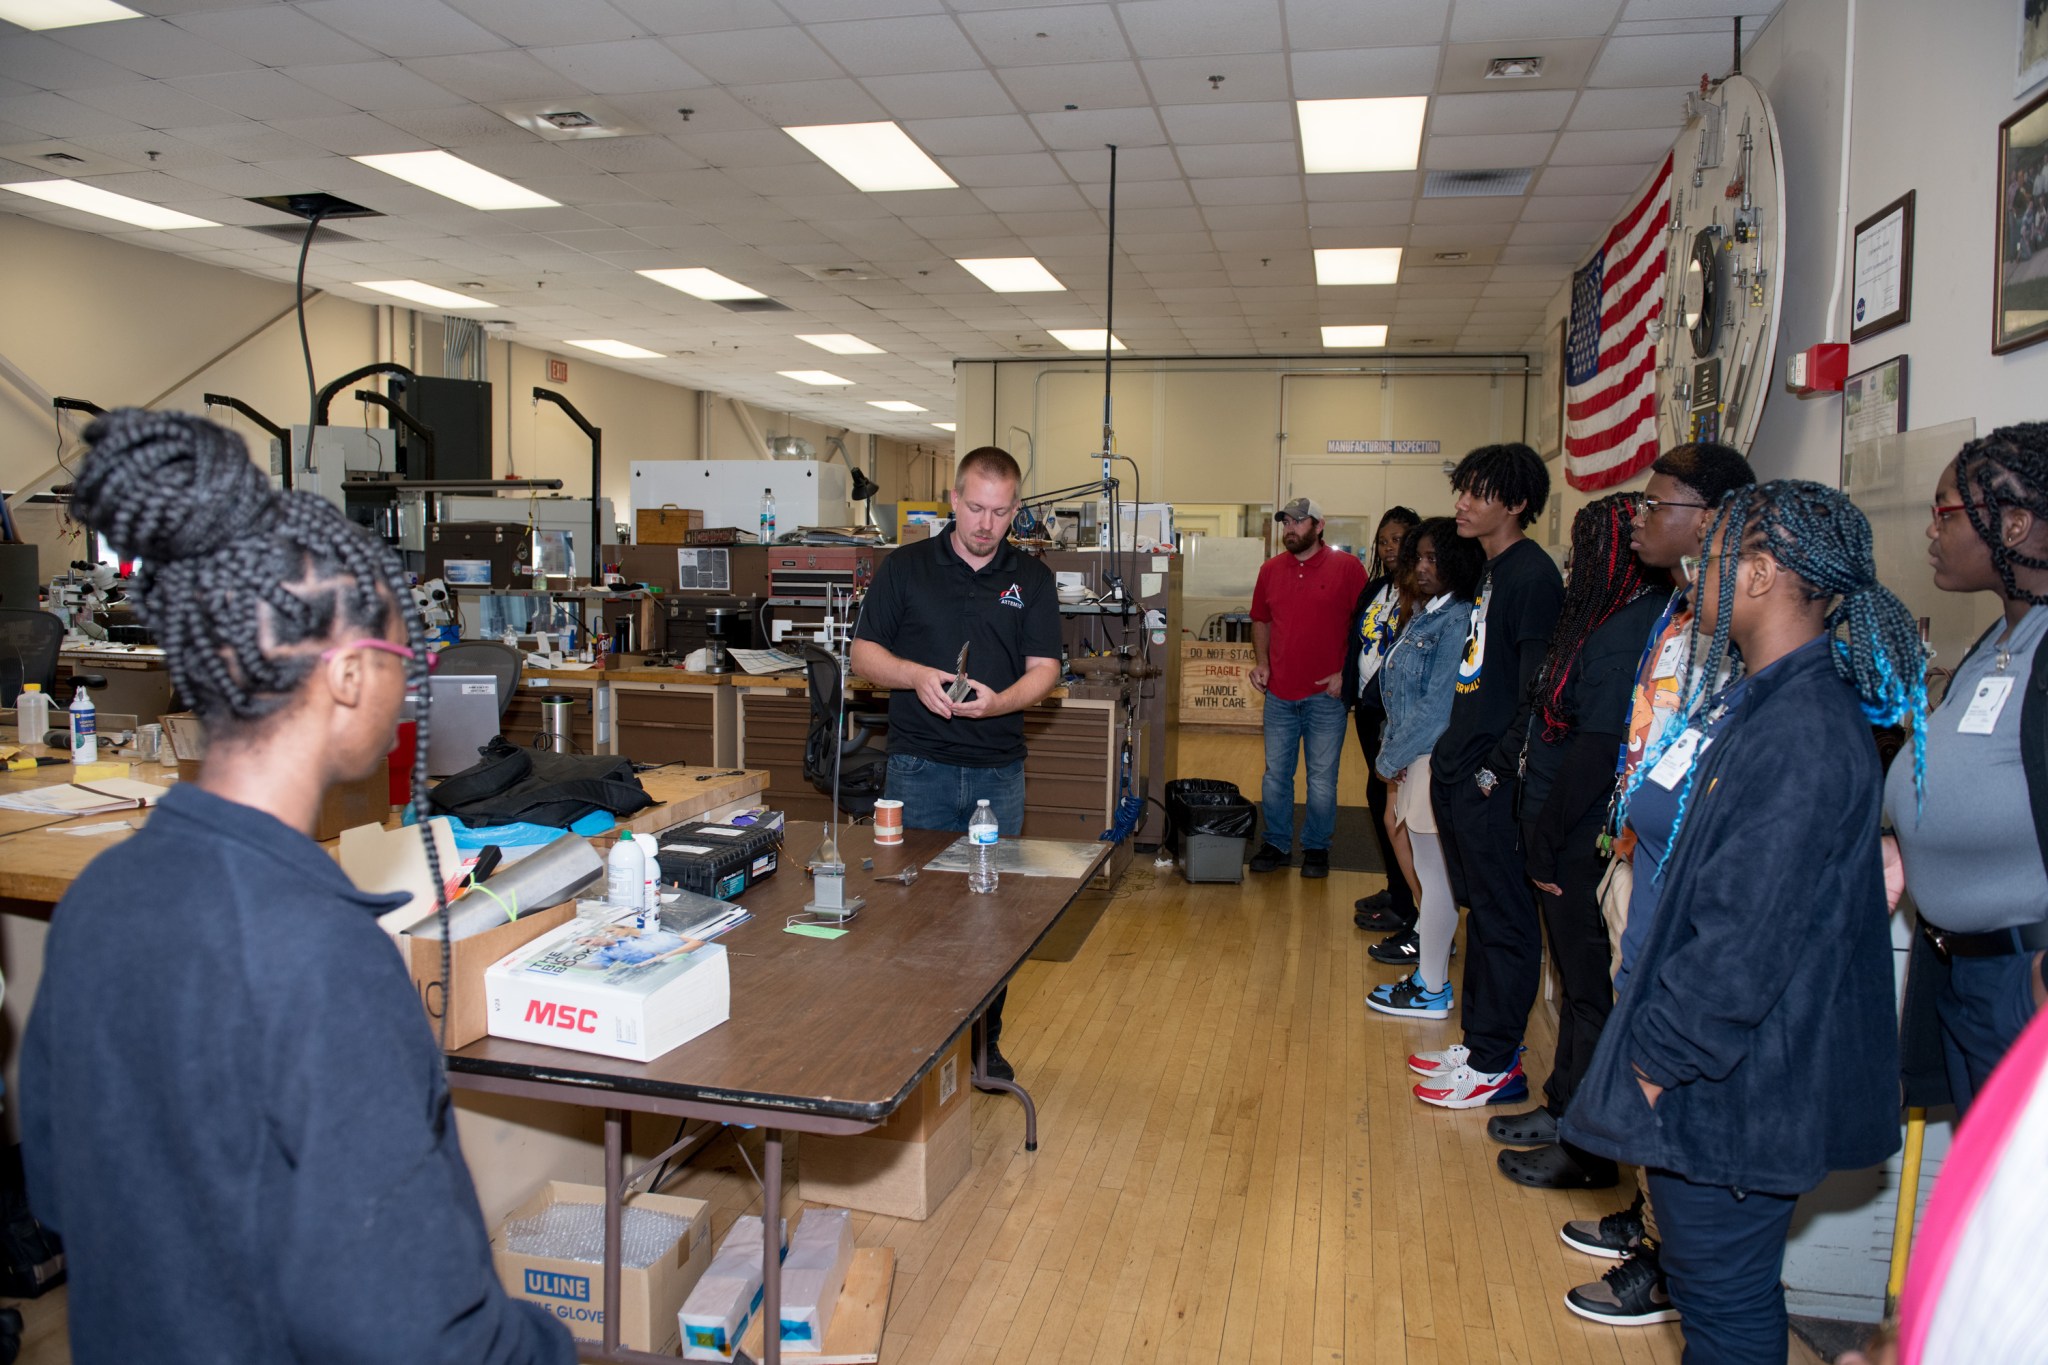 Students stand and watch as Chris Metro who is holding a steel part designed in NASA Glenn Research Center’s Manufacturing Facility.